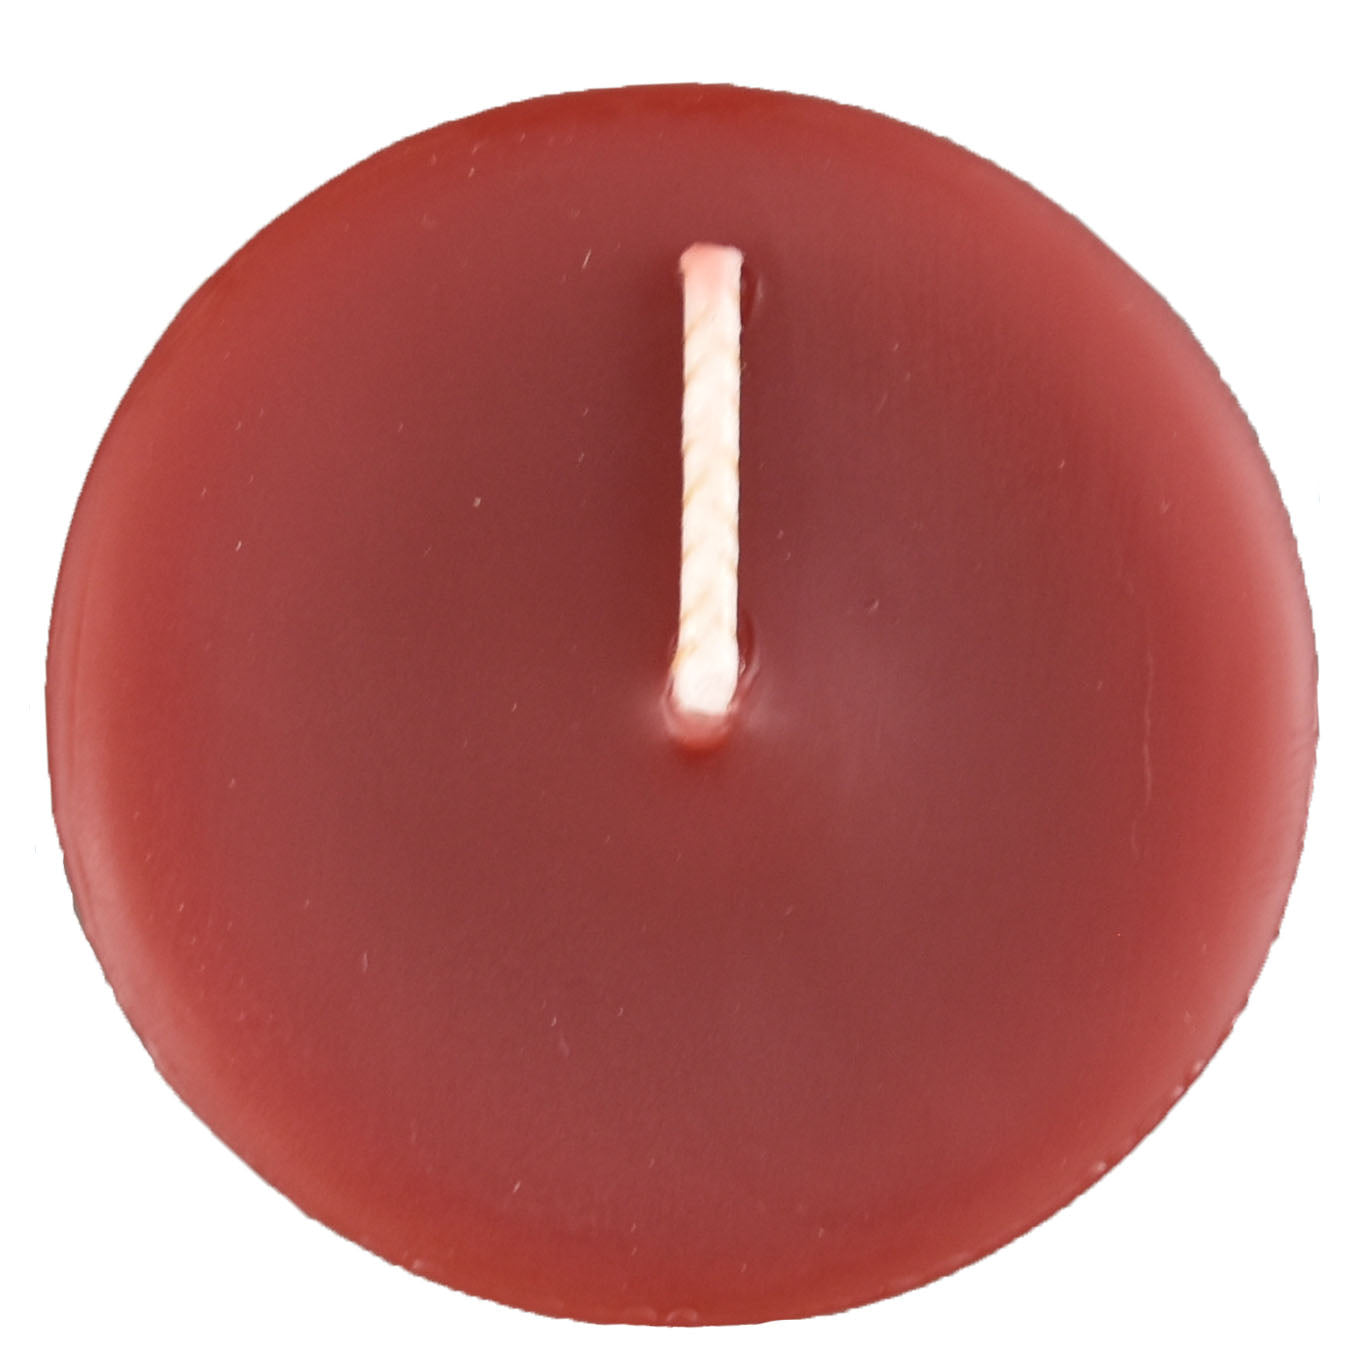 The top of a beeswax votive candle and wick, burgundy in color.